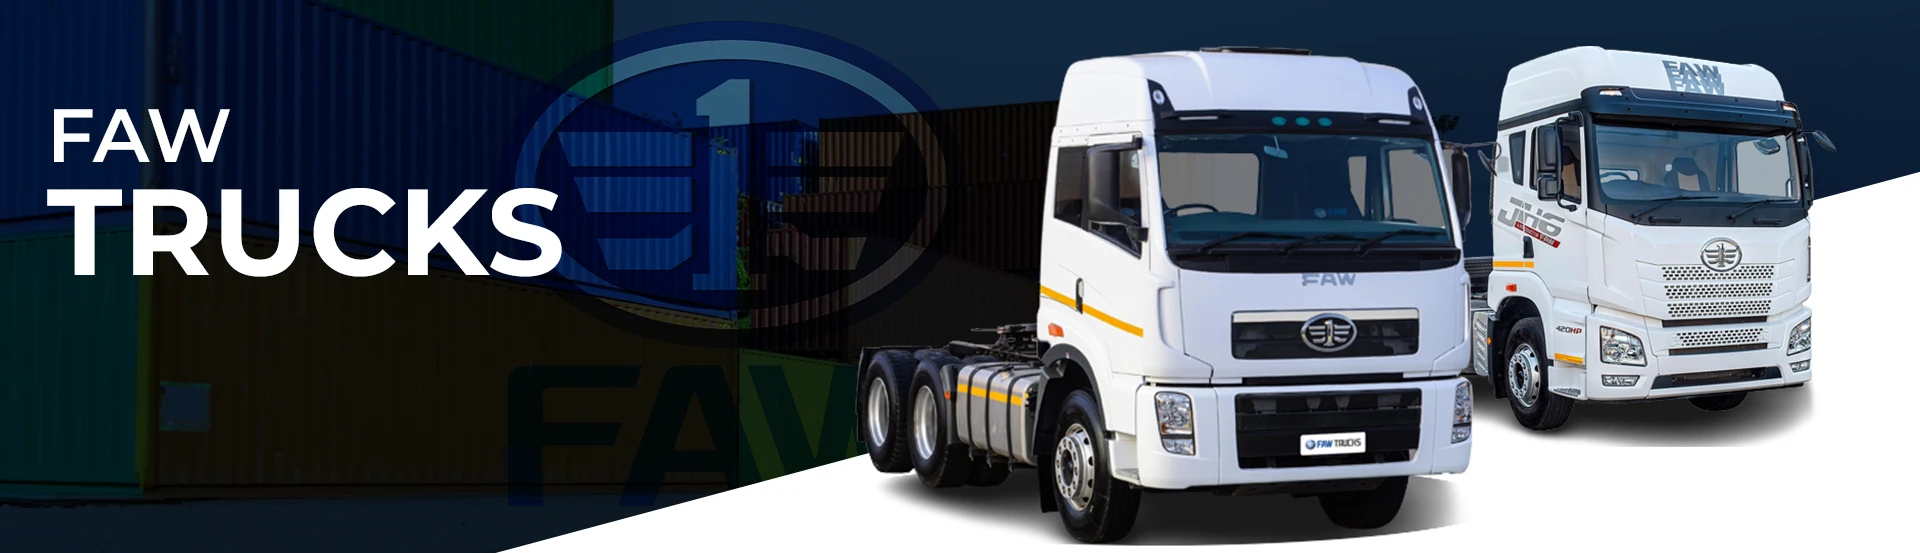 Myride Commercial FAW new truck banner